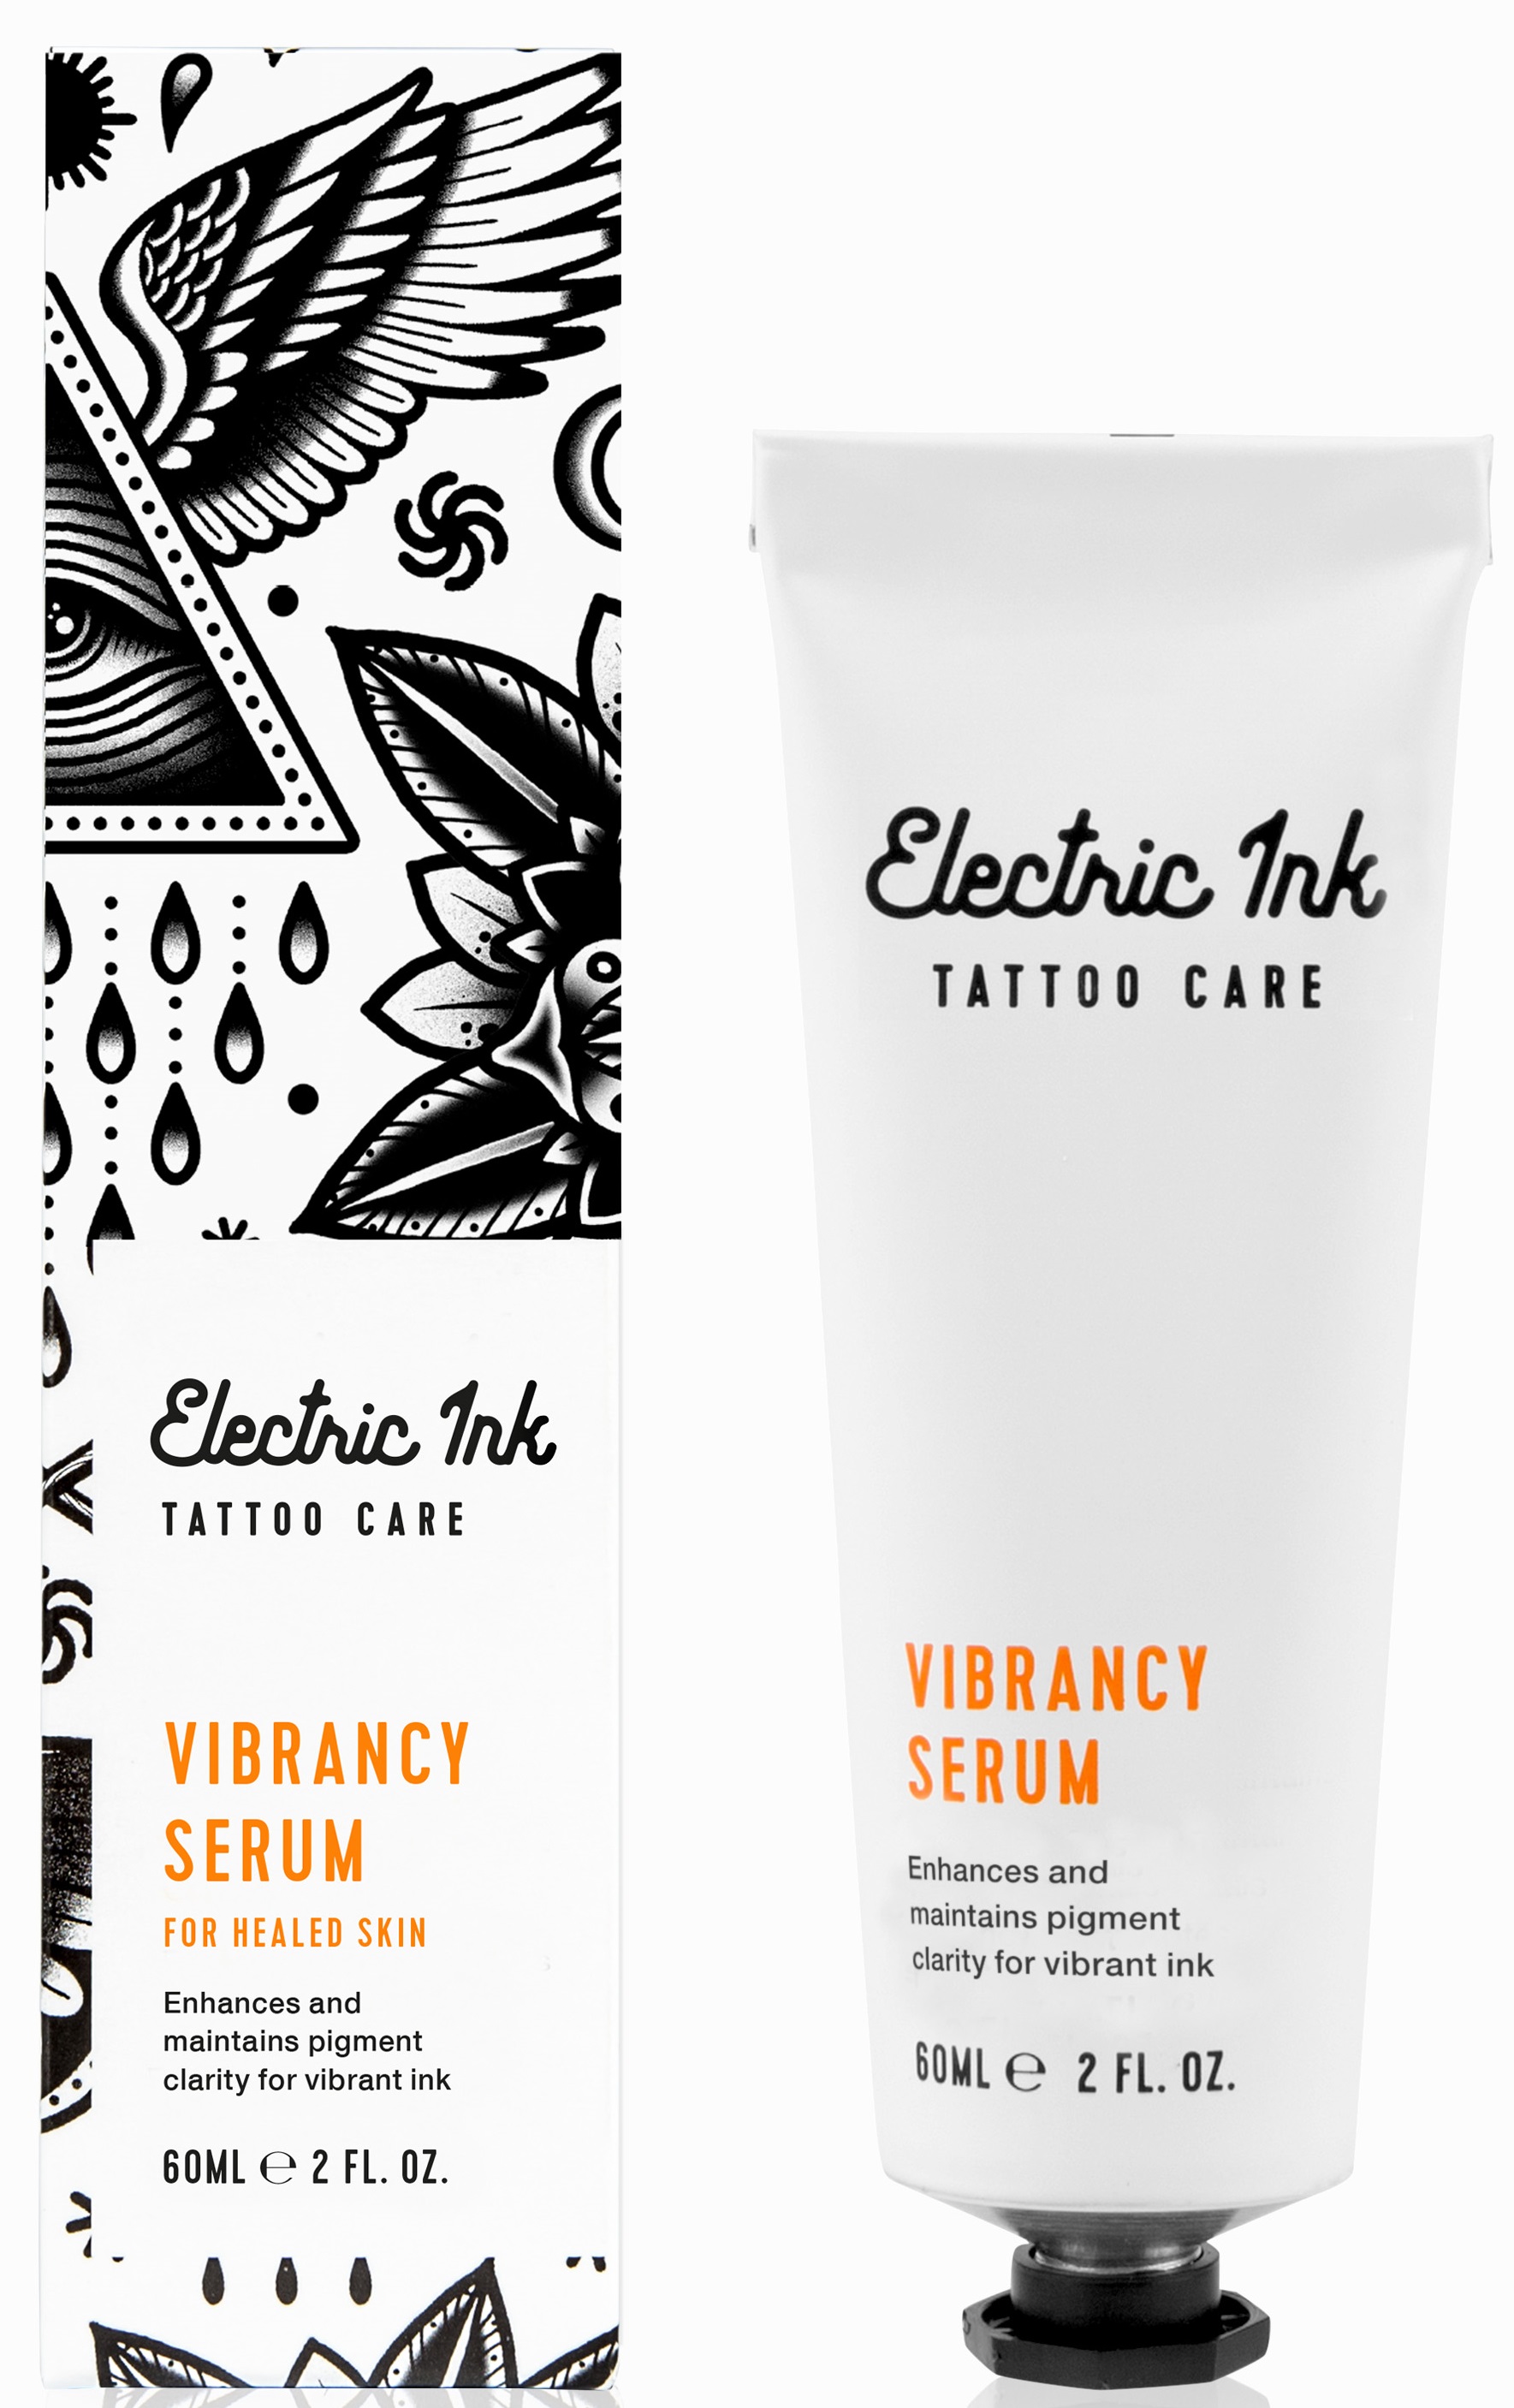 New Packaging Design for Electric Ink by Robot Food  BPO  Cosmetic  packaging design Tattoo care Creative packaging design